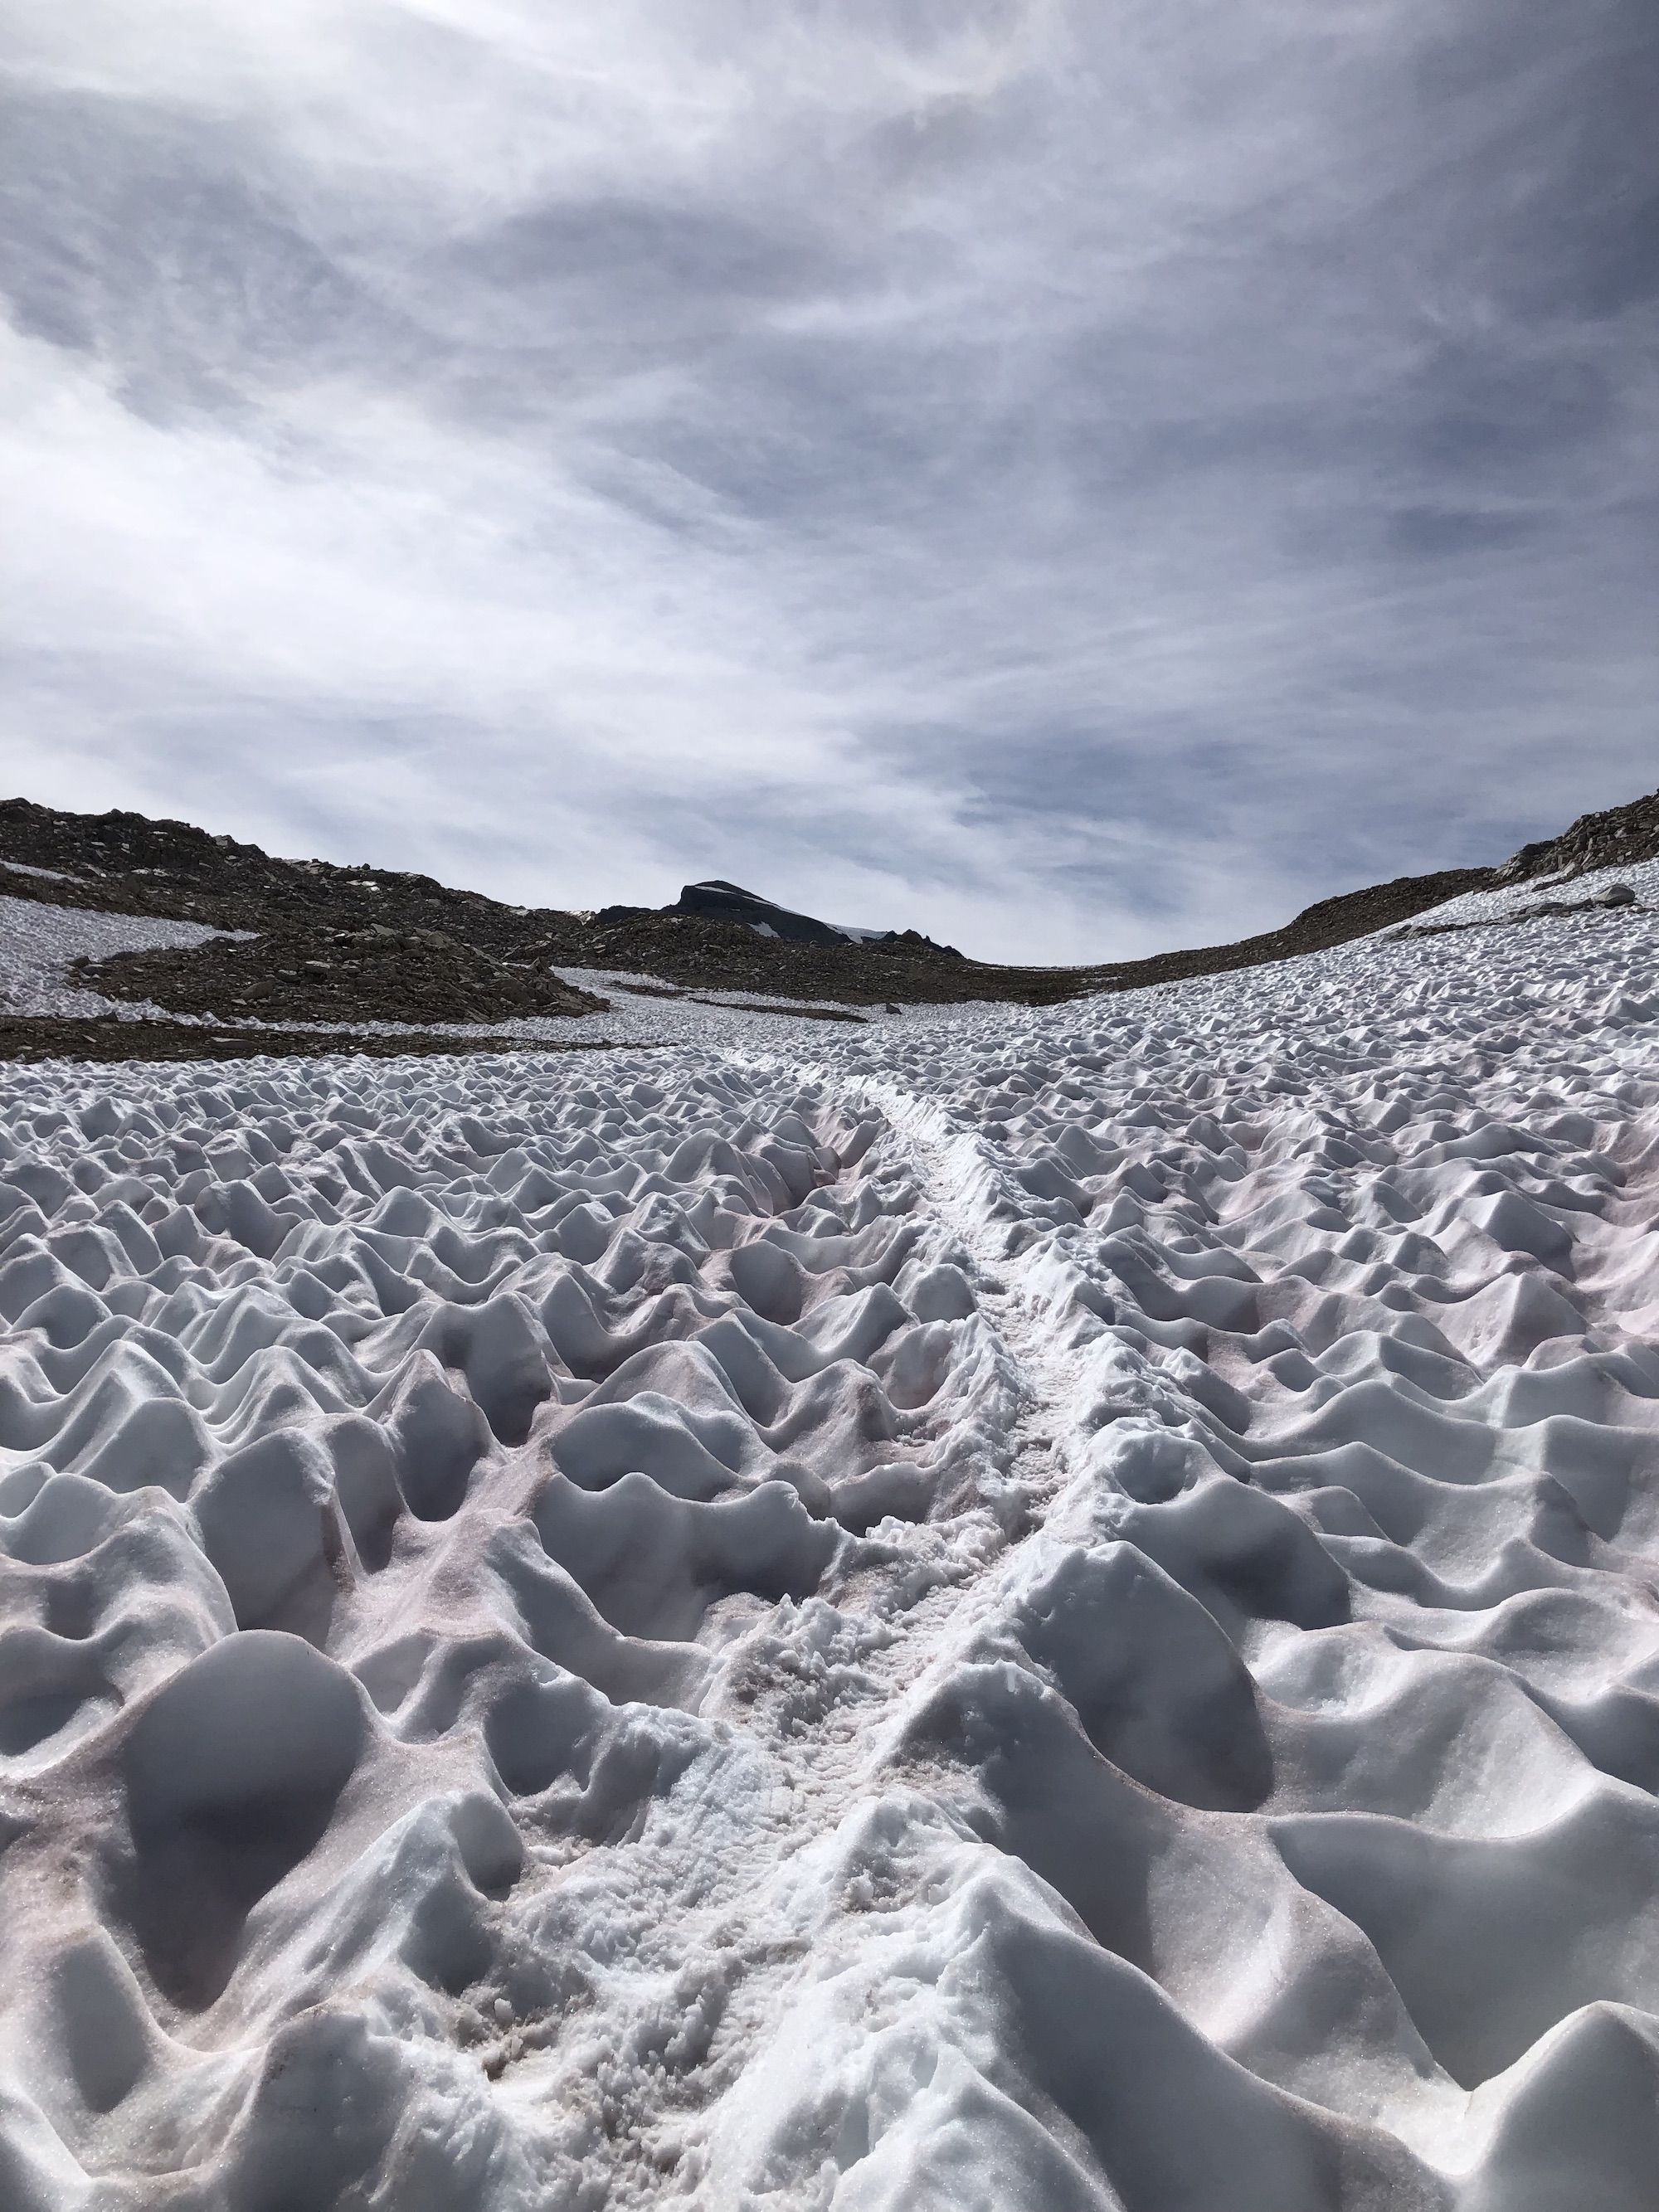 A boot track through a snow field heading uphill